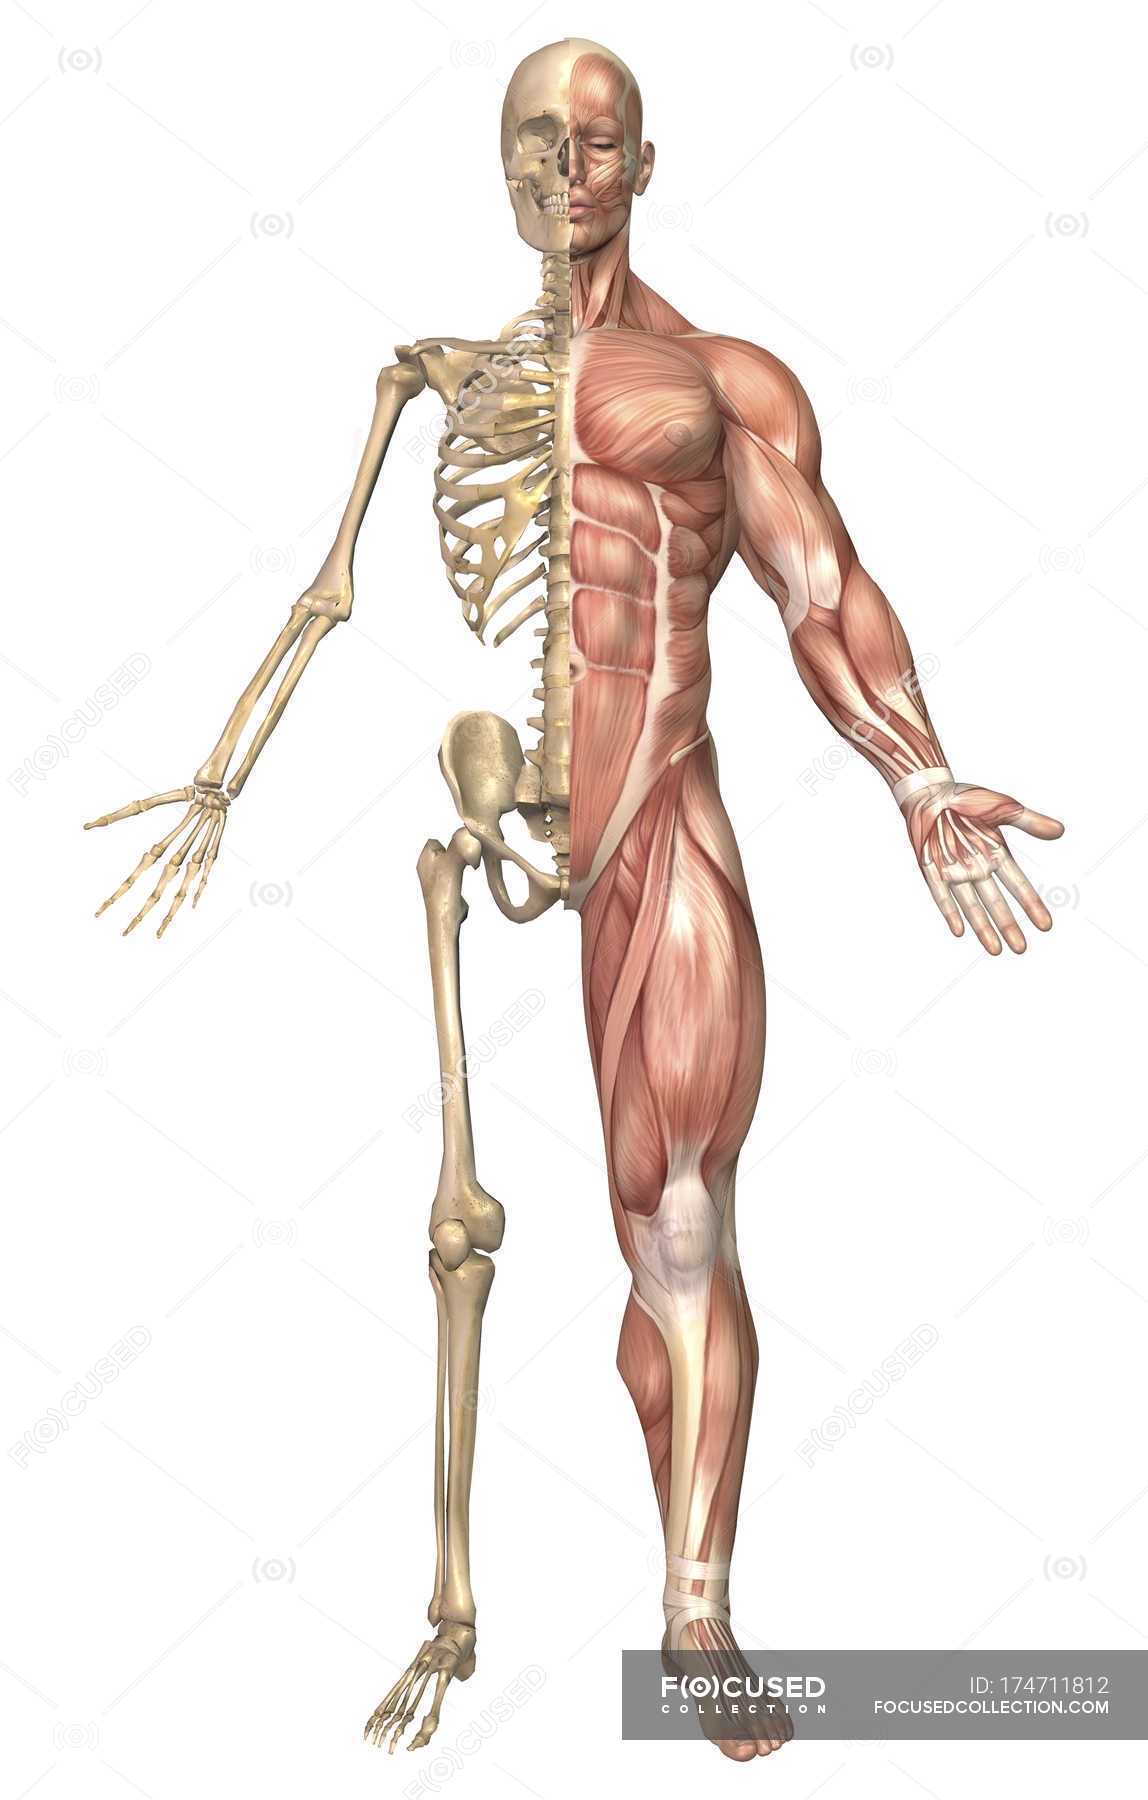 Medical Illustration Of The Human Skeleton And Muscular System Humerus Cranium Stock Photo 174711812